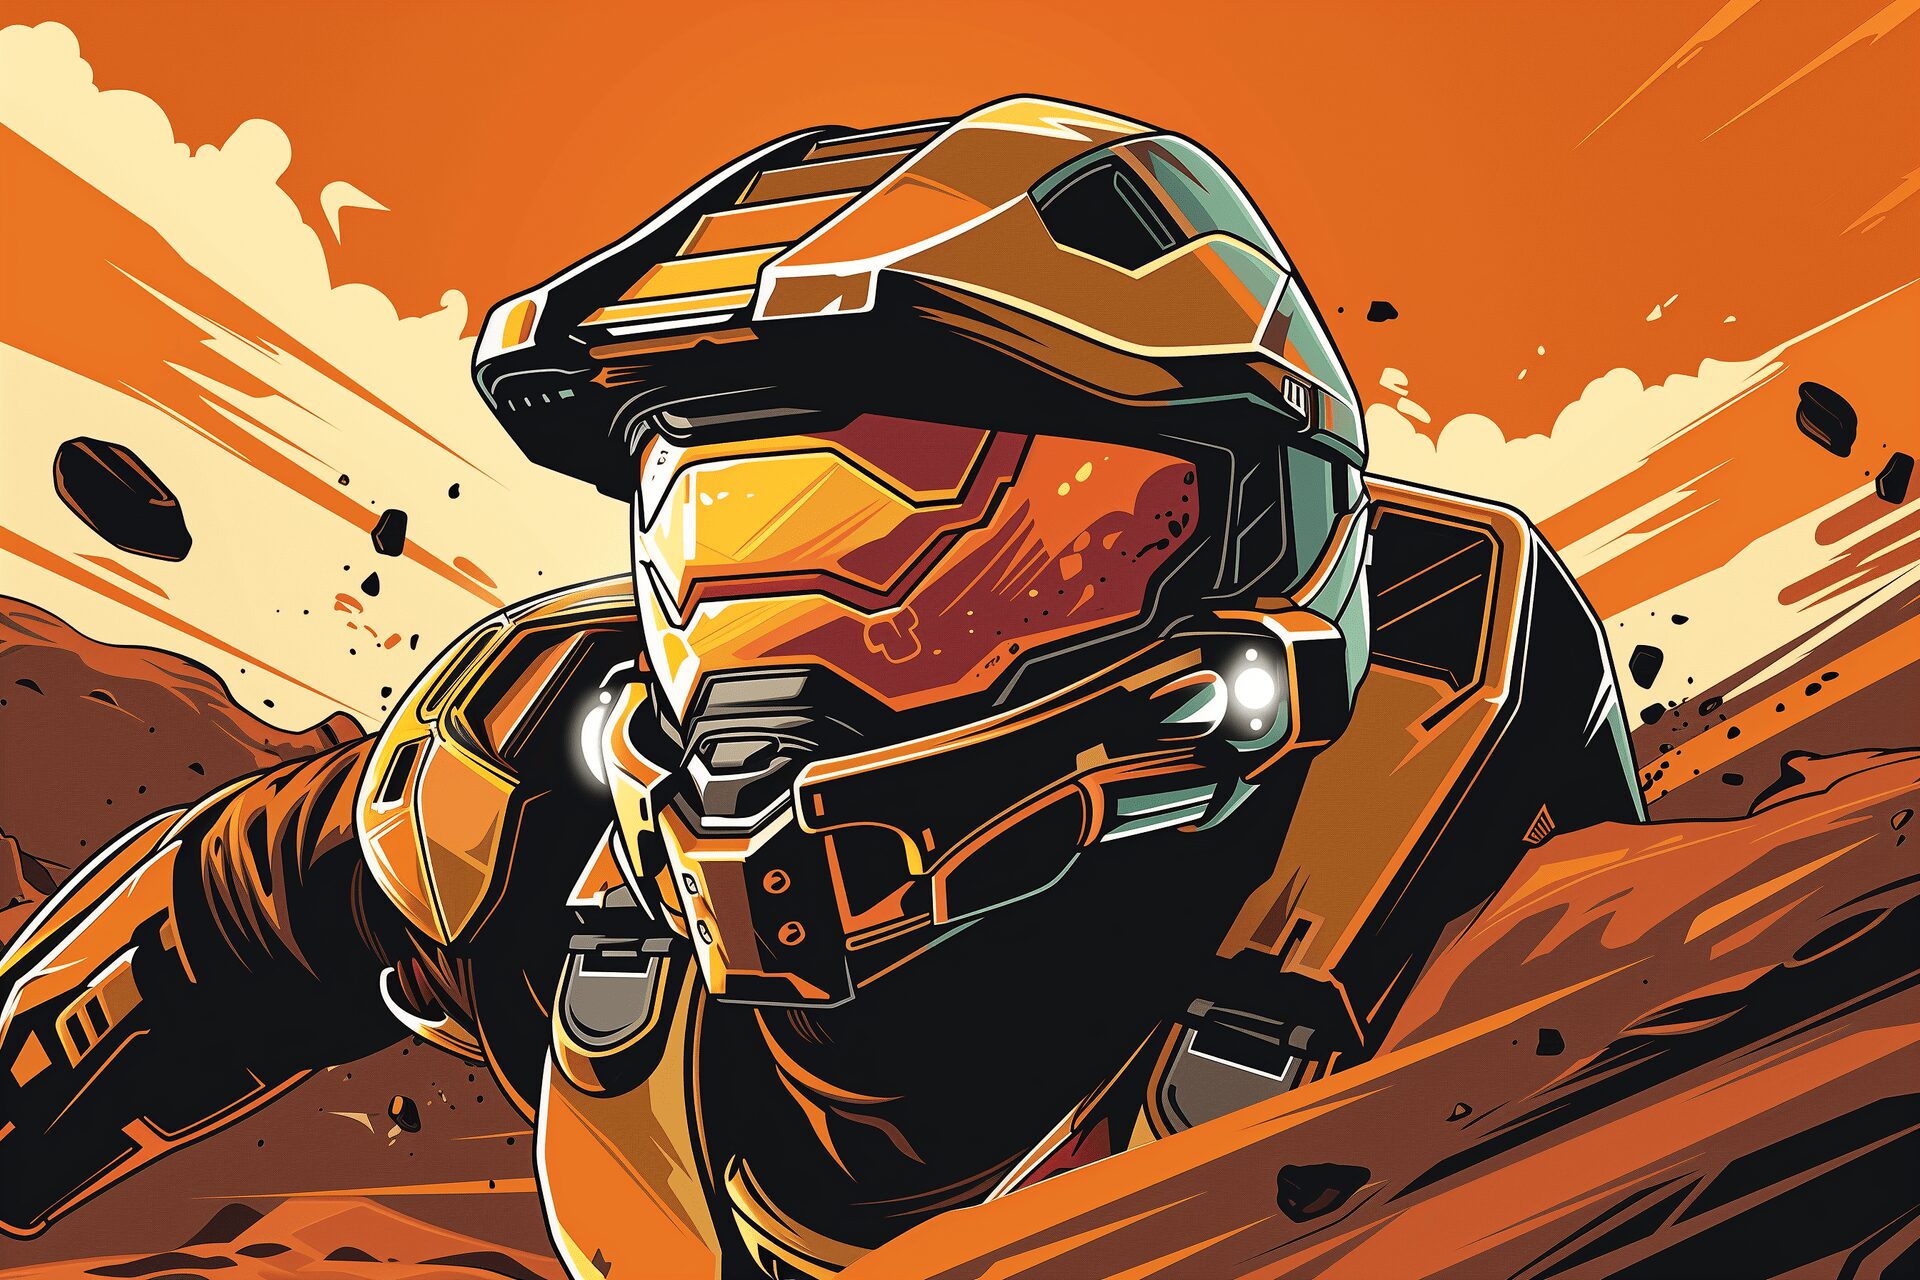 Fanart of Master Chief from Halo